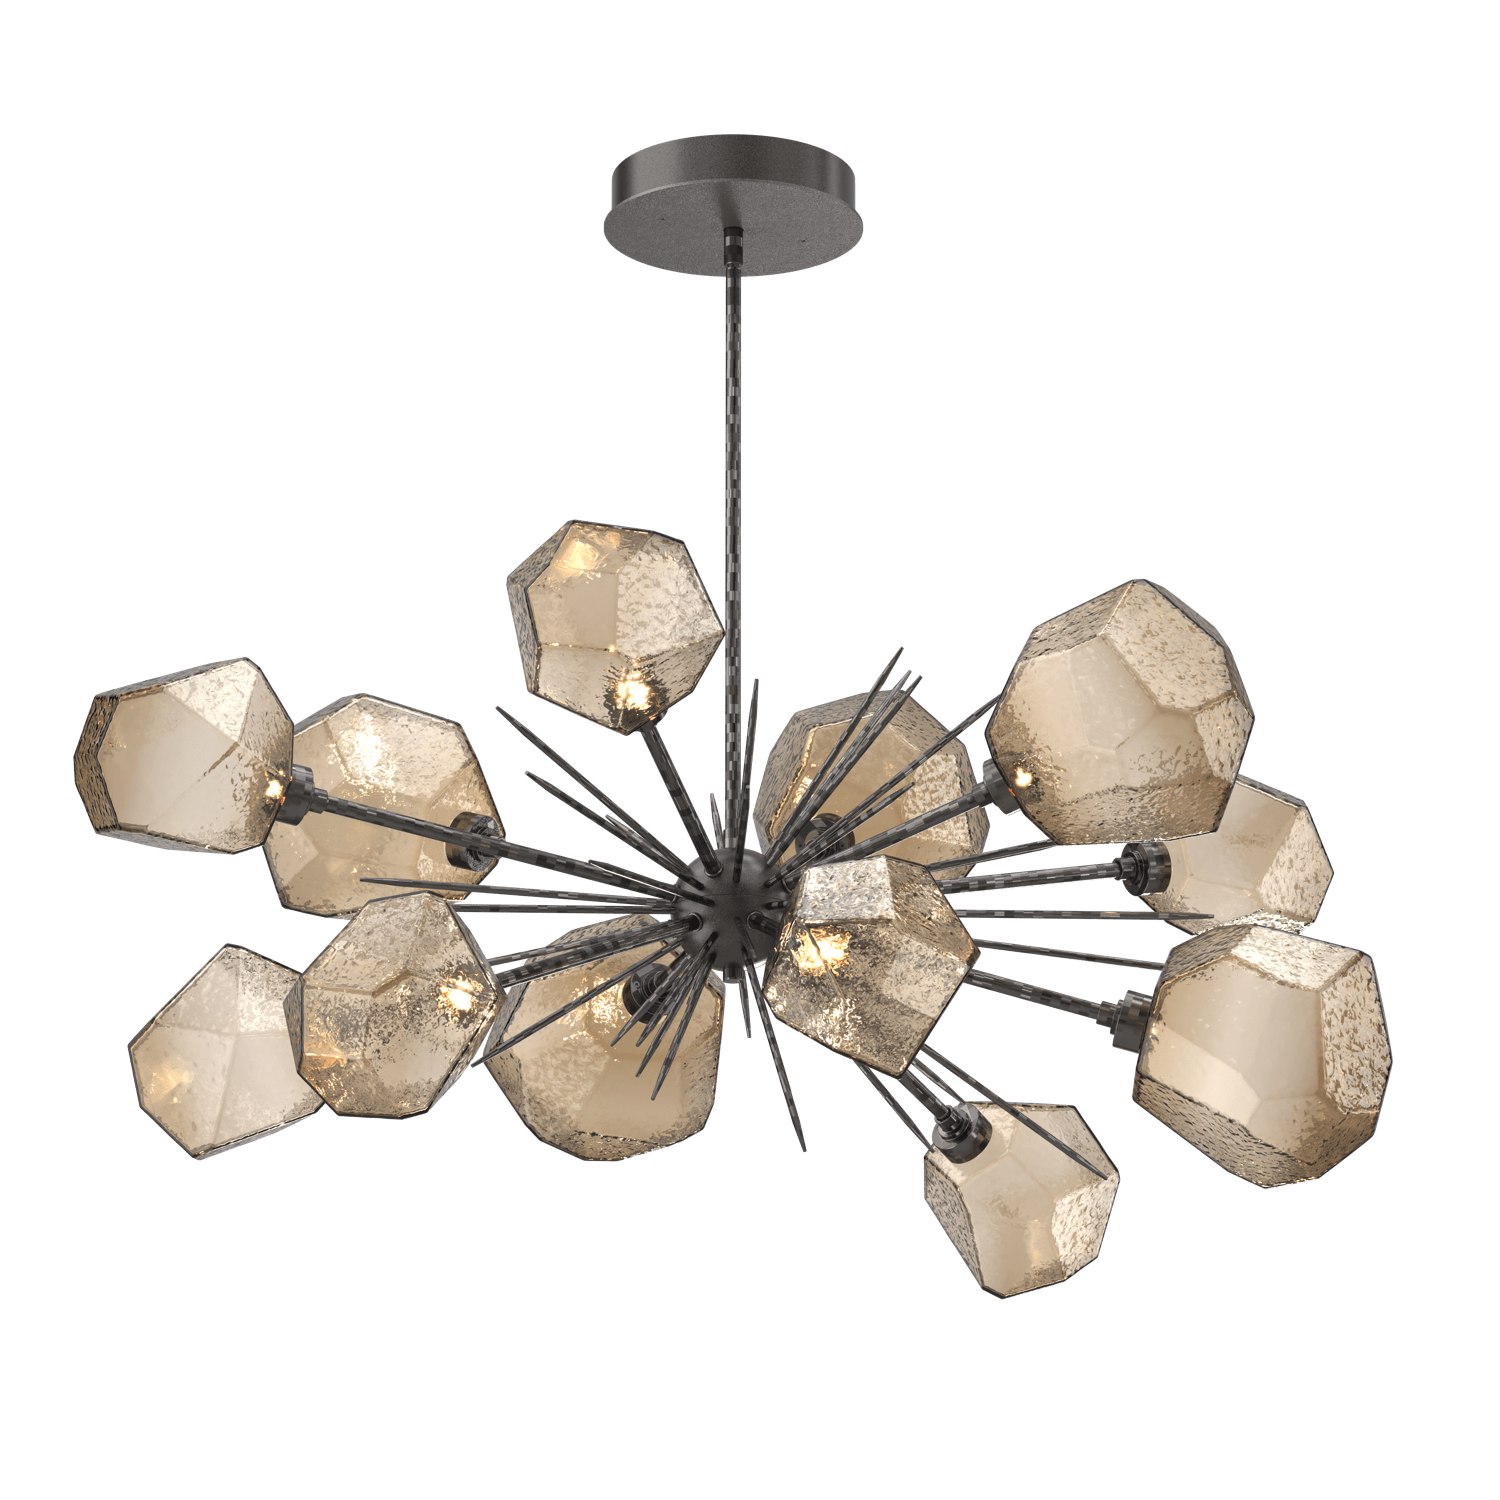 PLB0039-0D-GP-B-Hammerton-Studio-Gem-43-inch-oval-starburst-chandelier-with-graphite-finish-and-bronze-blown-glass-shades-and-LED-lamping